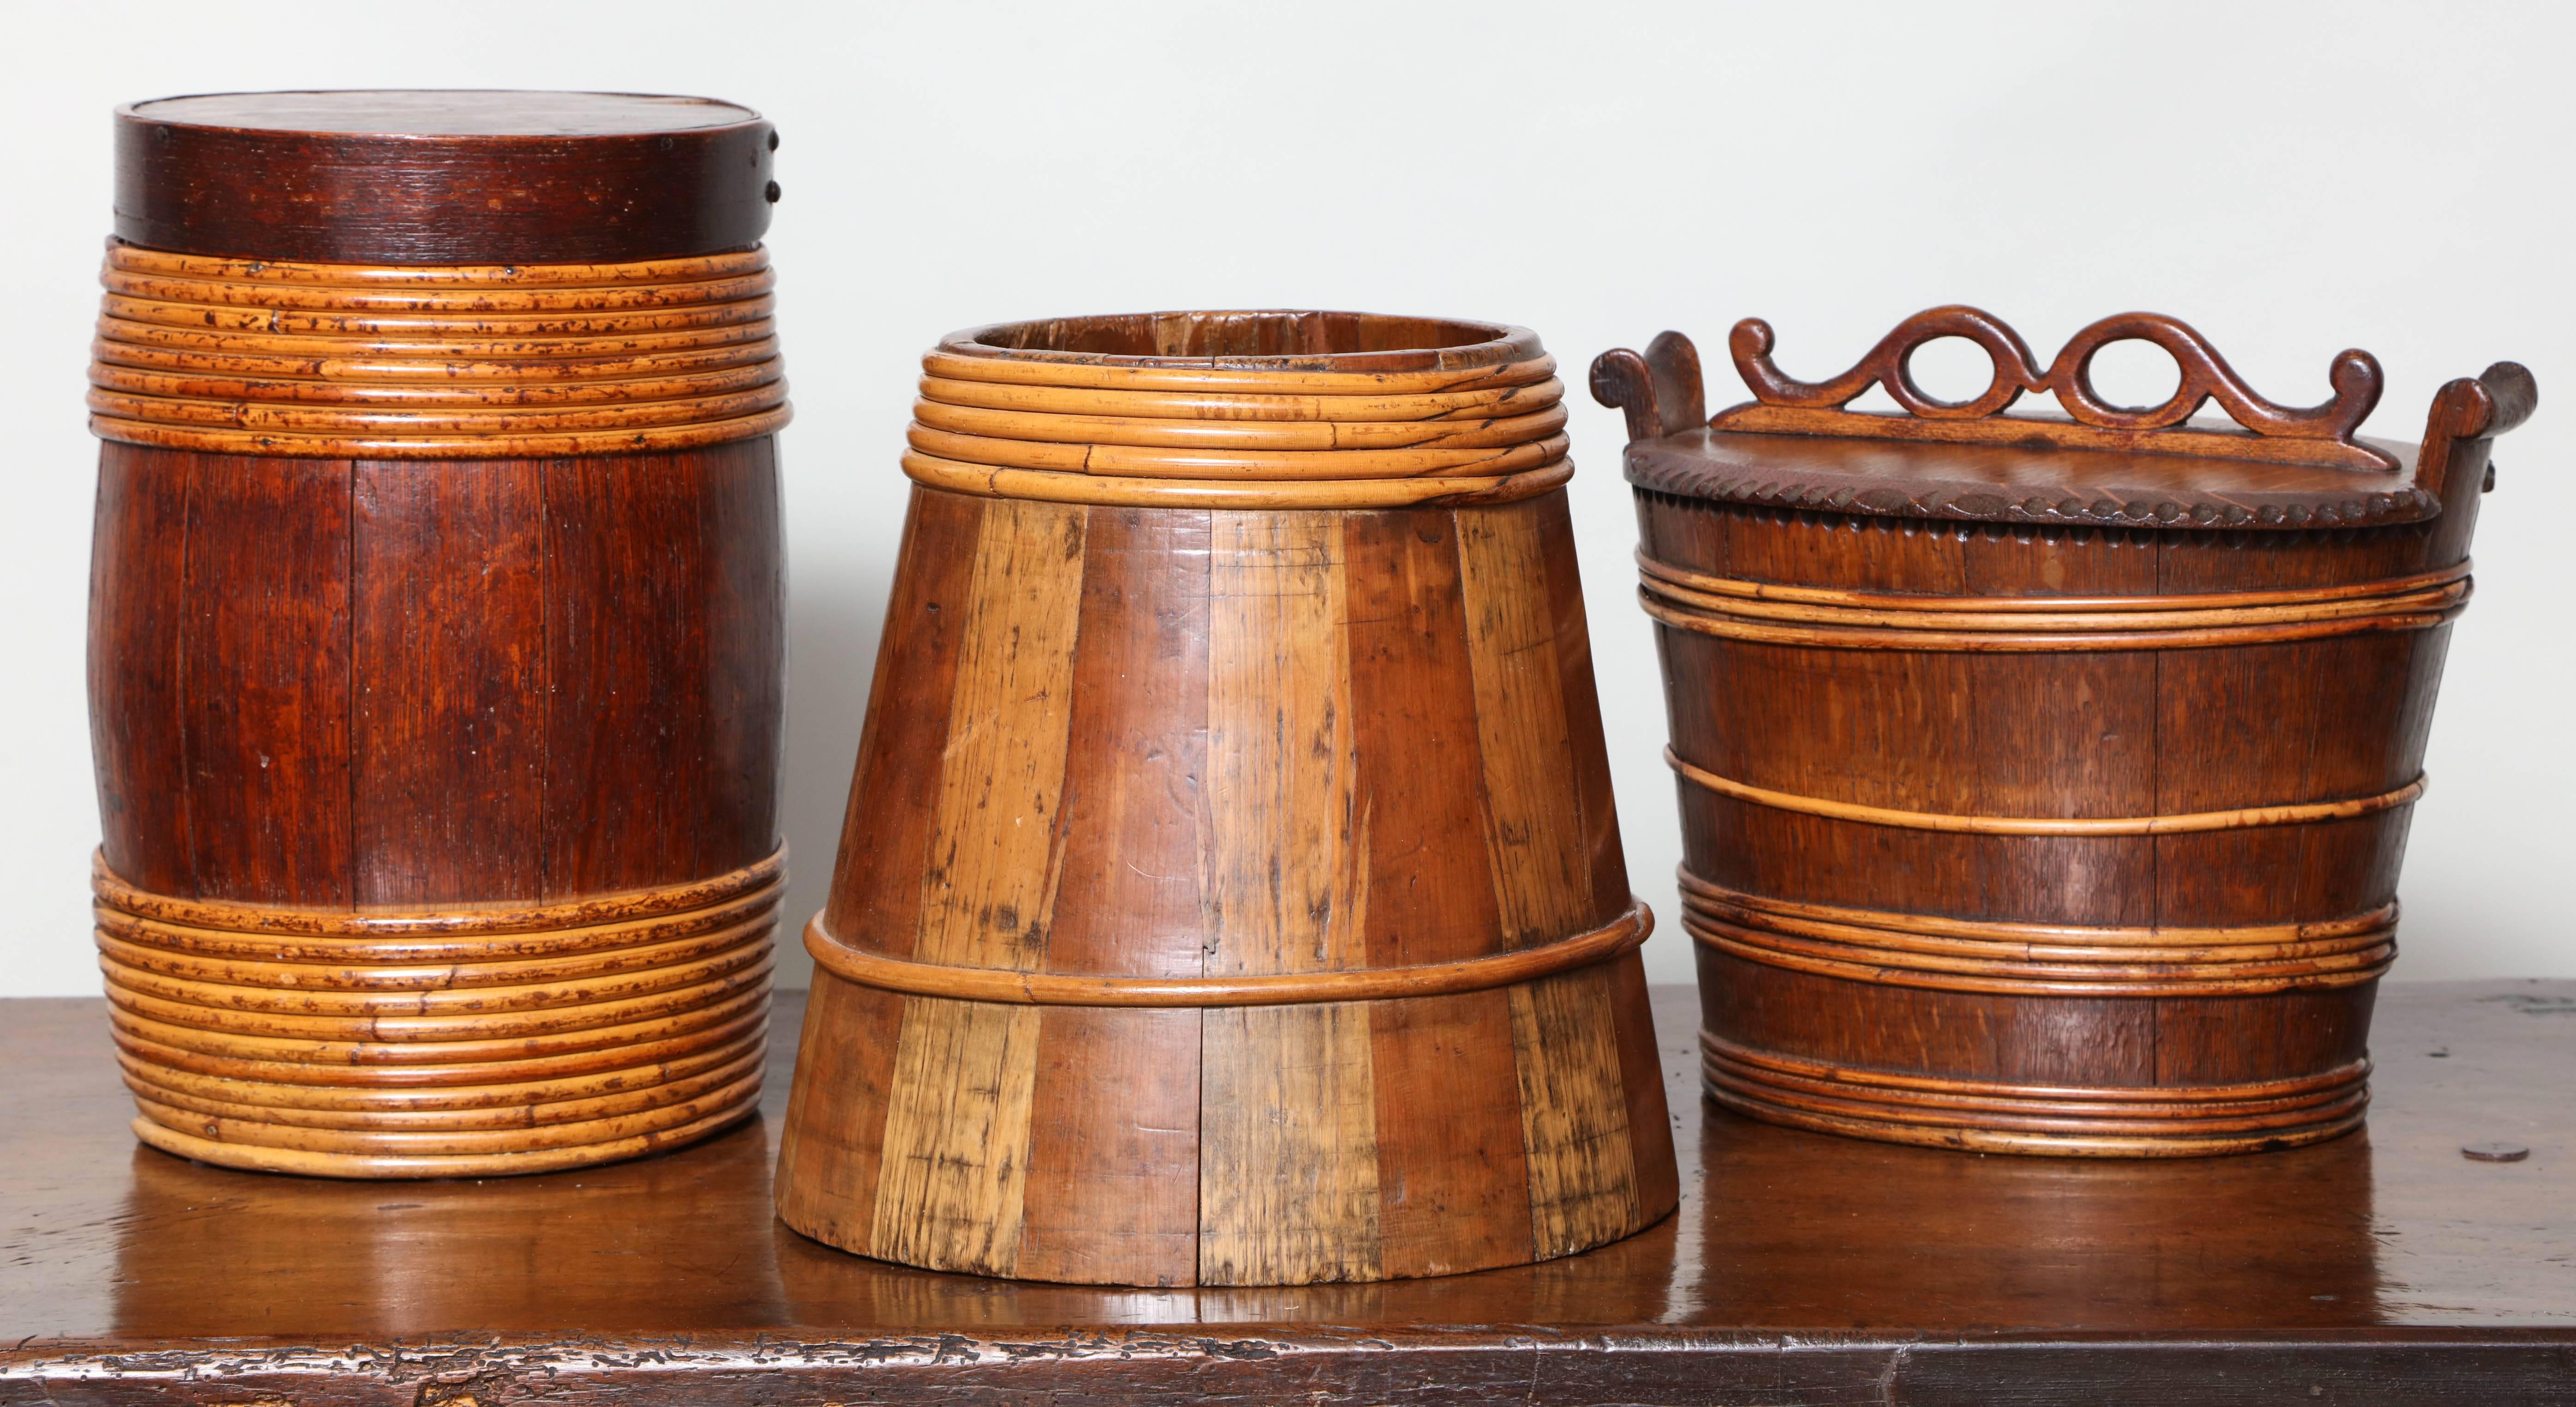 Collection of three 19th century willow banded treen vessels comprising:

A Scottish firkin in mixed woods, alternating pine (light) and fruitwood (dark) having feather joints holding the staves together and bound with willow, Ex. Collection A.J.